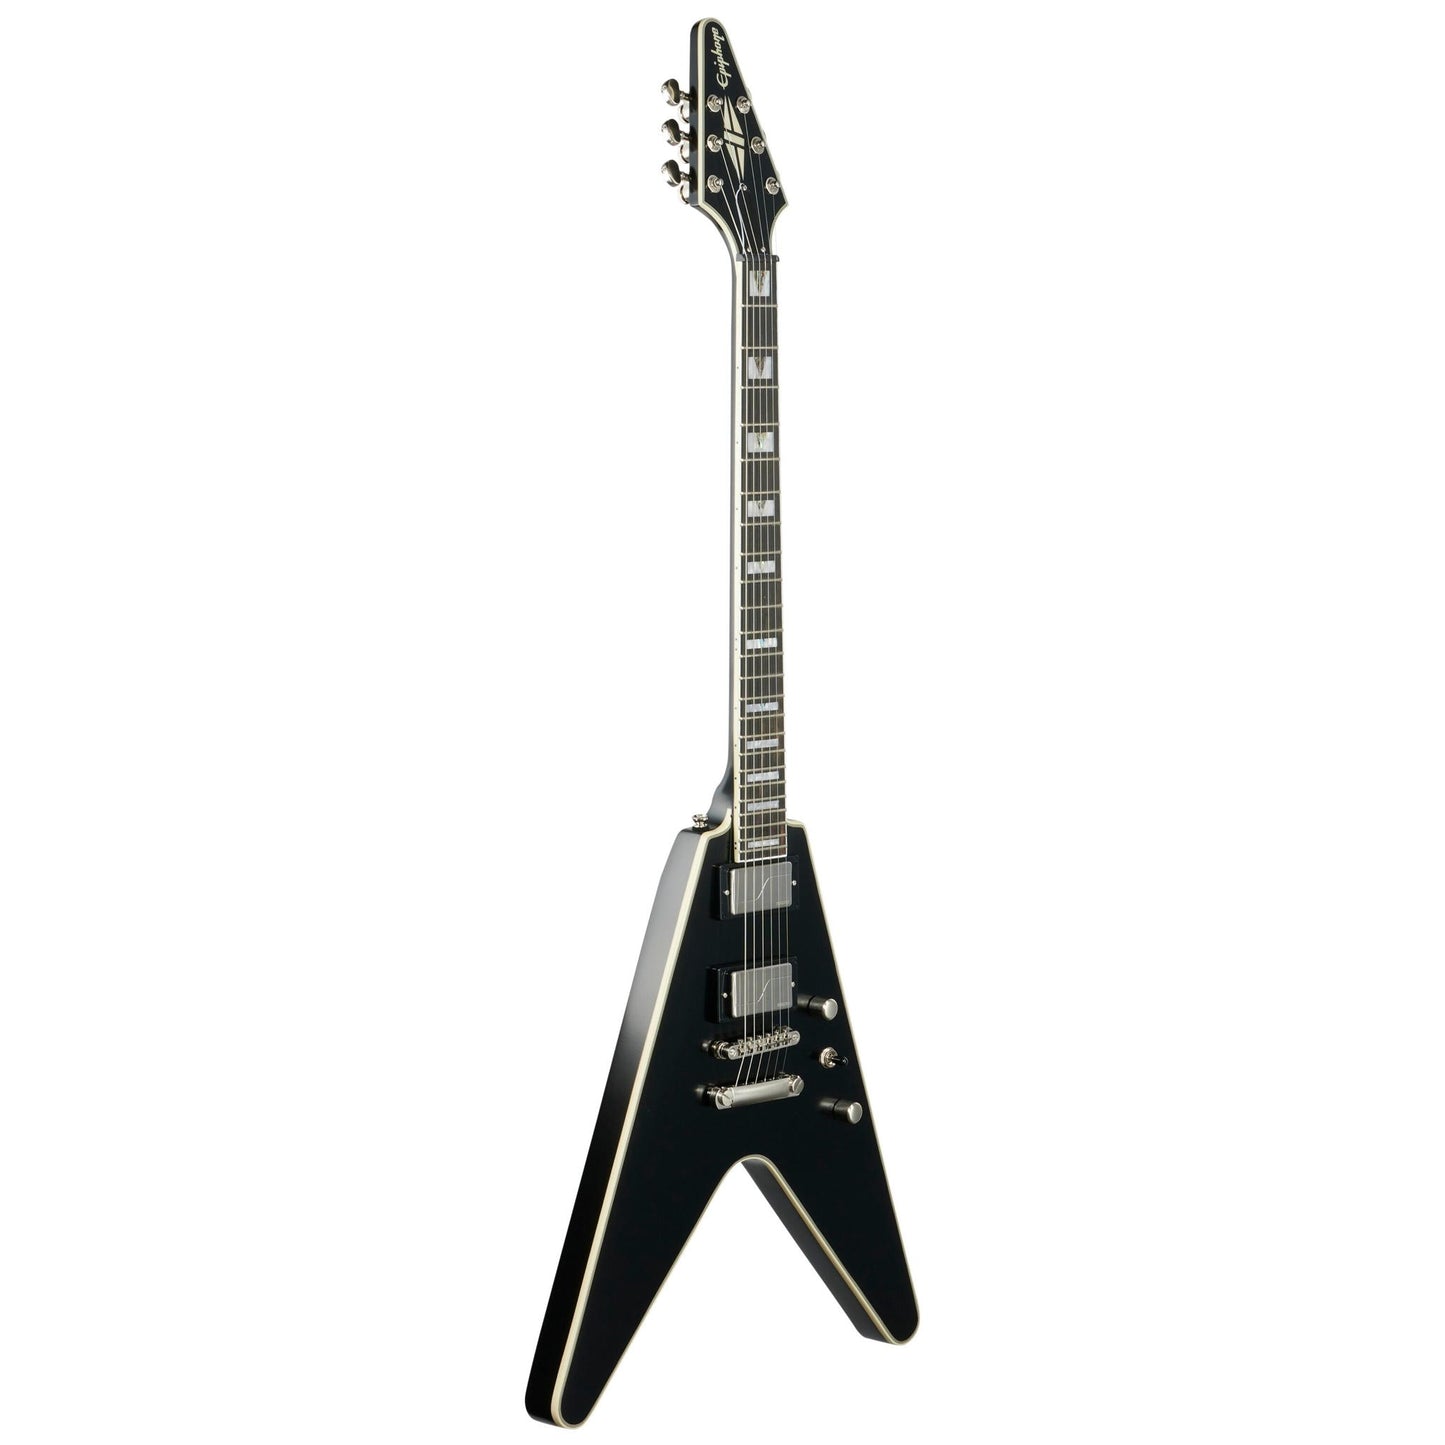 Epiphone Flying V Prophecy Electric Guitar, Black Aged Gloss